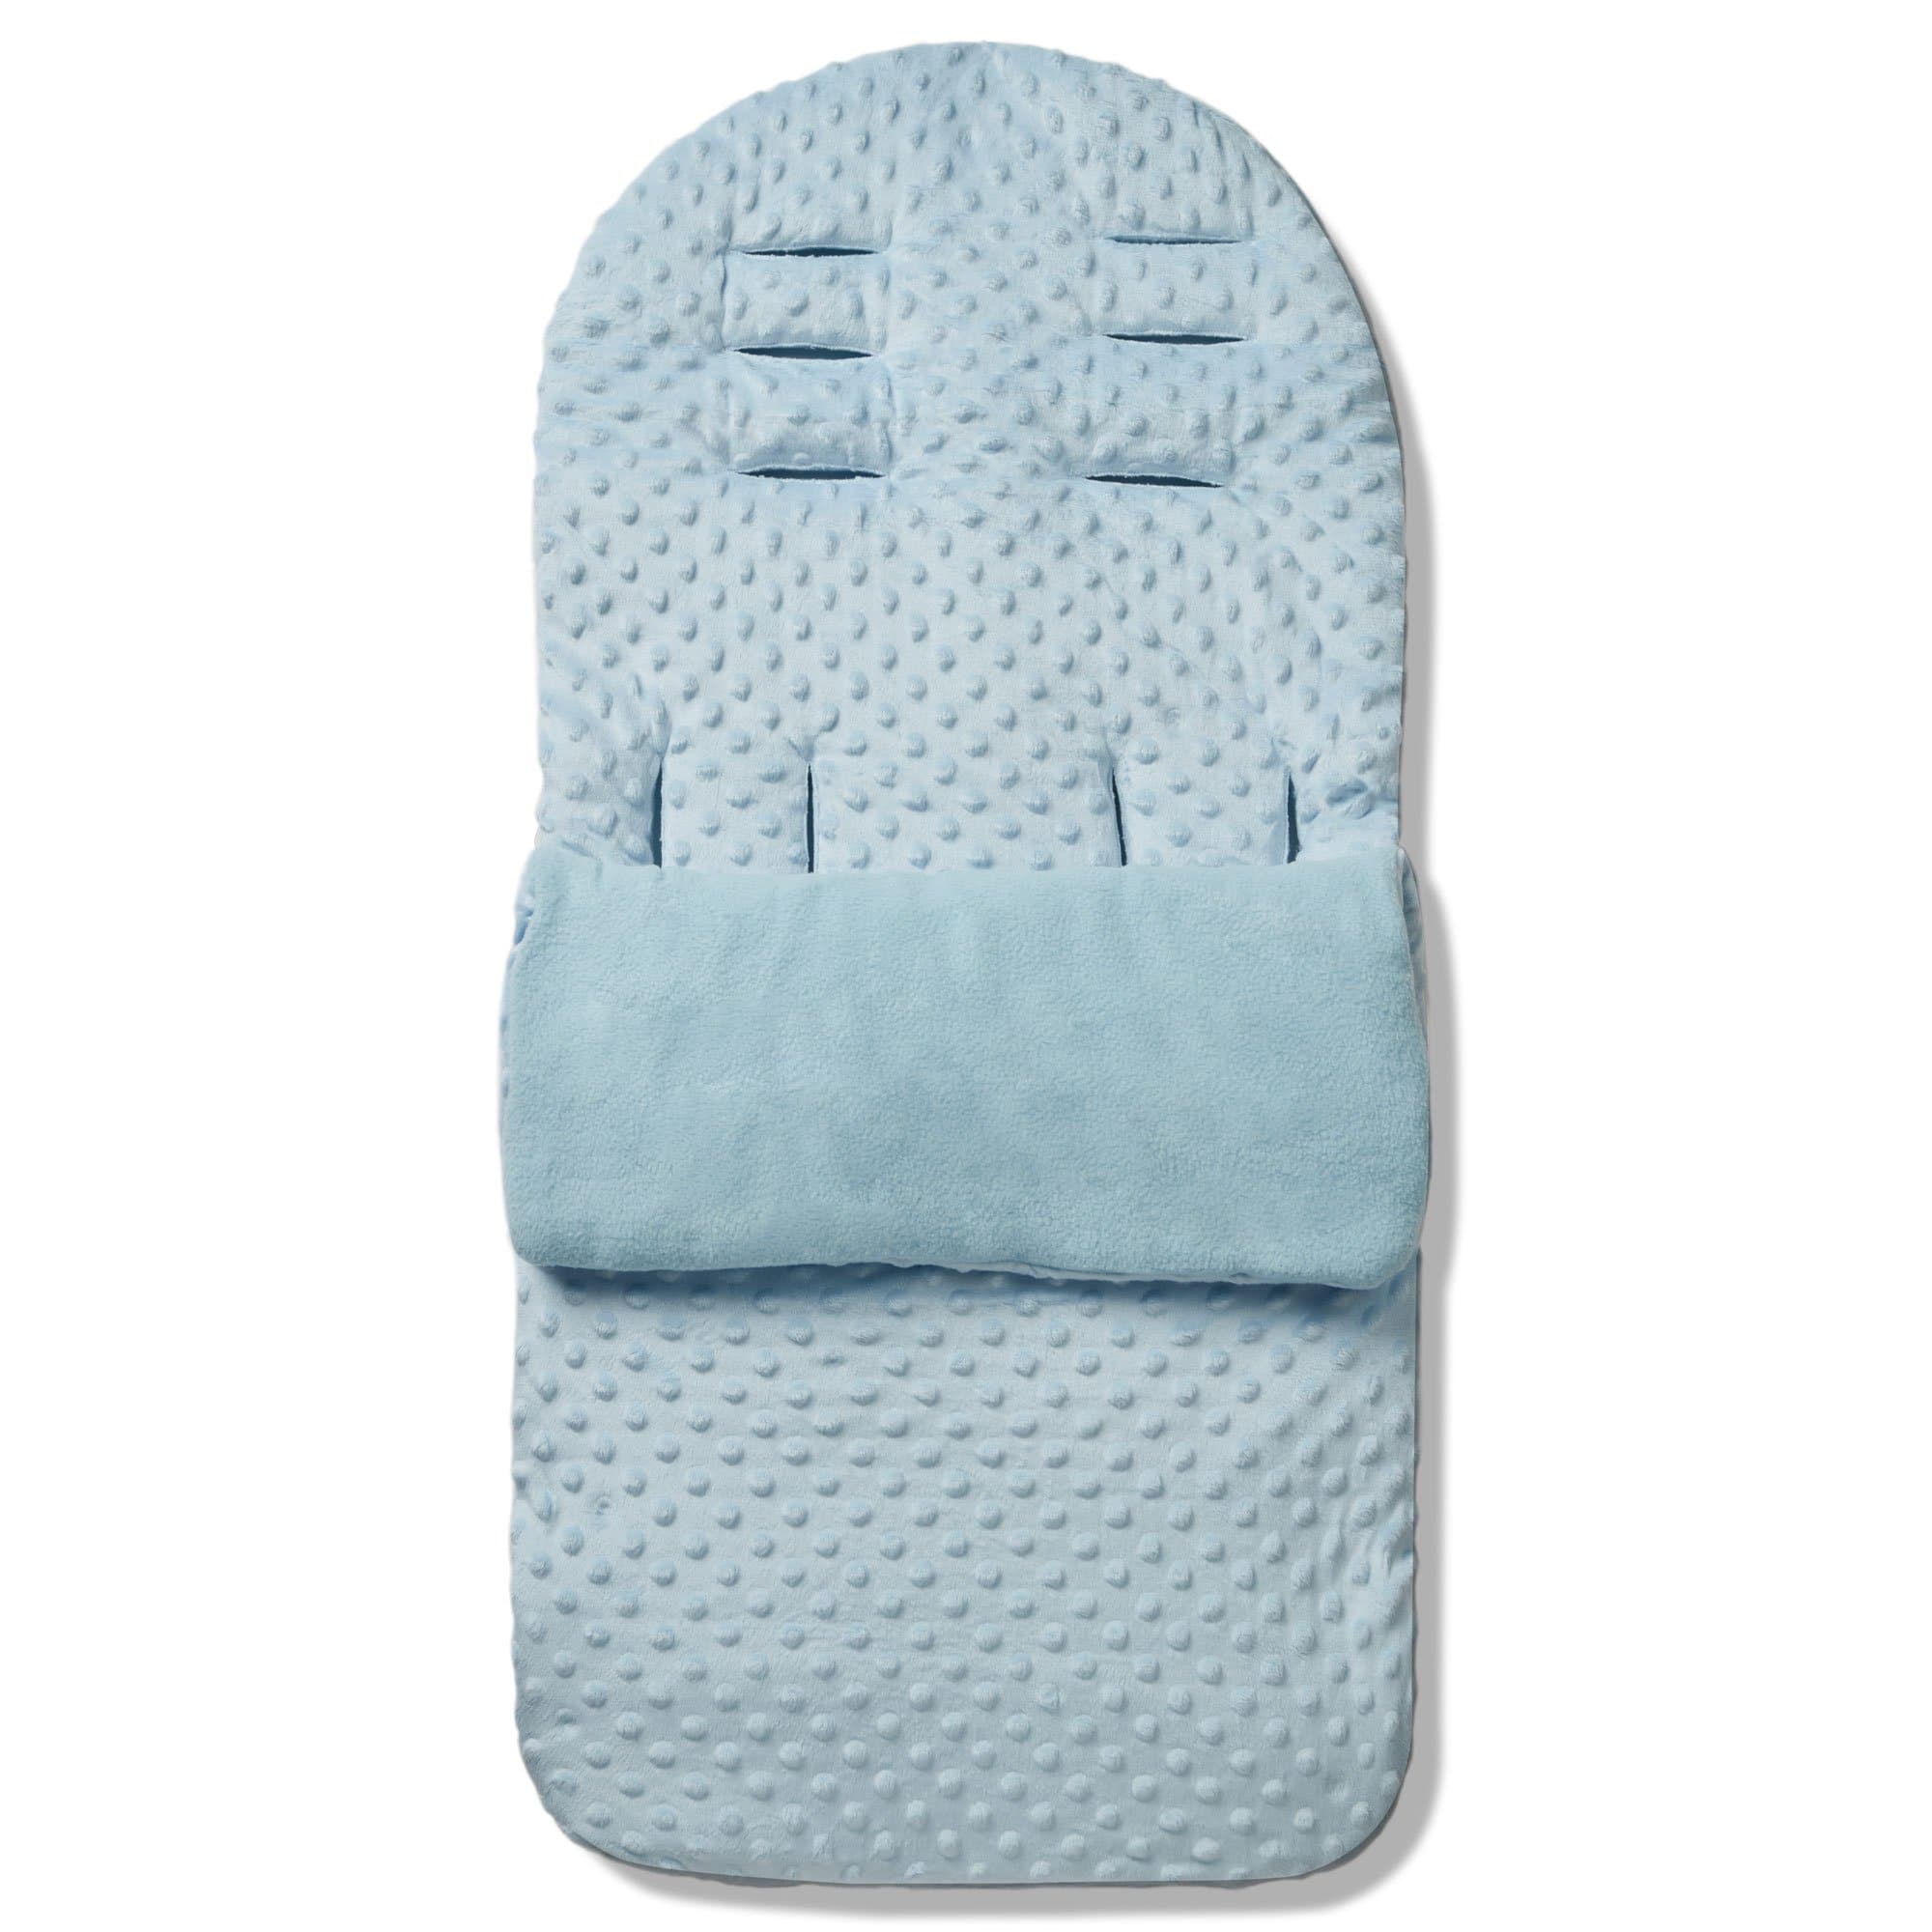 Dimple Footmuff / Cosy Toes Compatible with Bumbleride - Blue / Fits All Models | For Your Little One